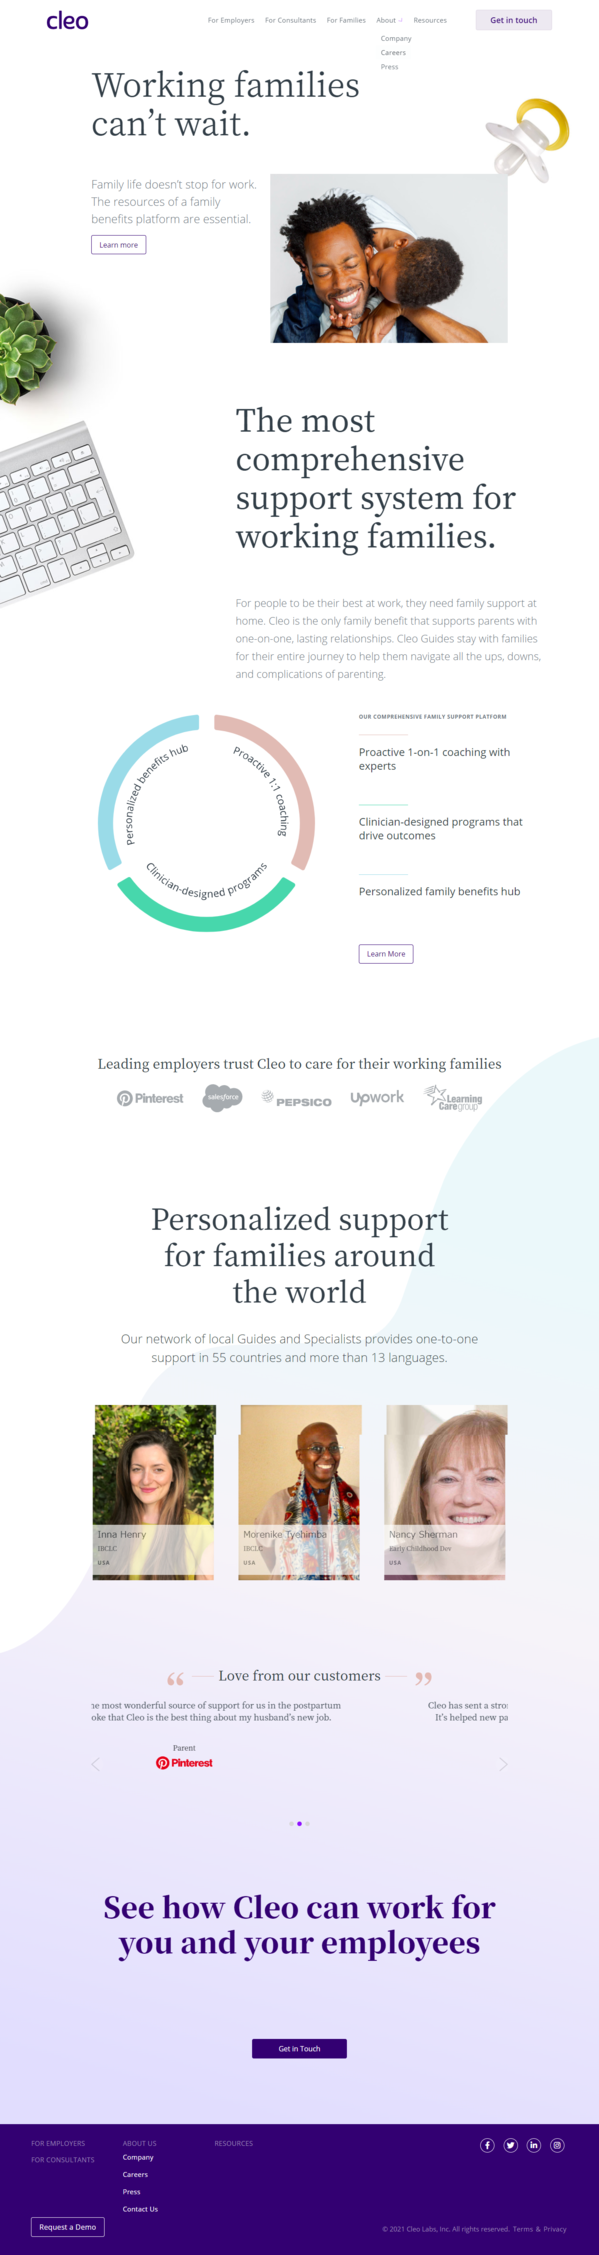 - Working parent family benefits platform for employers - Cleo - hicleo.com.png